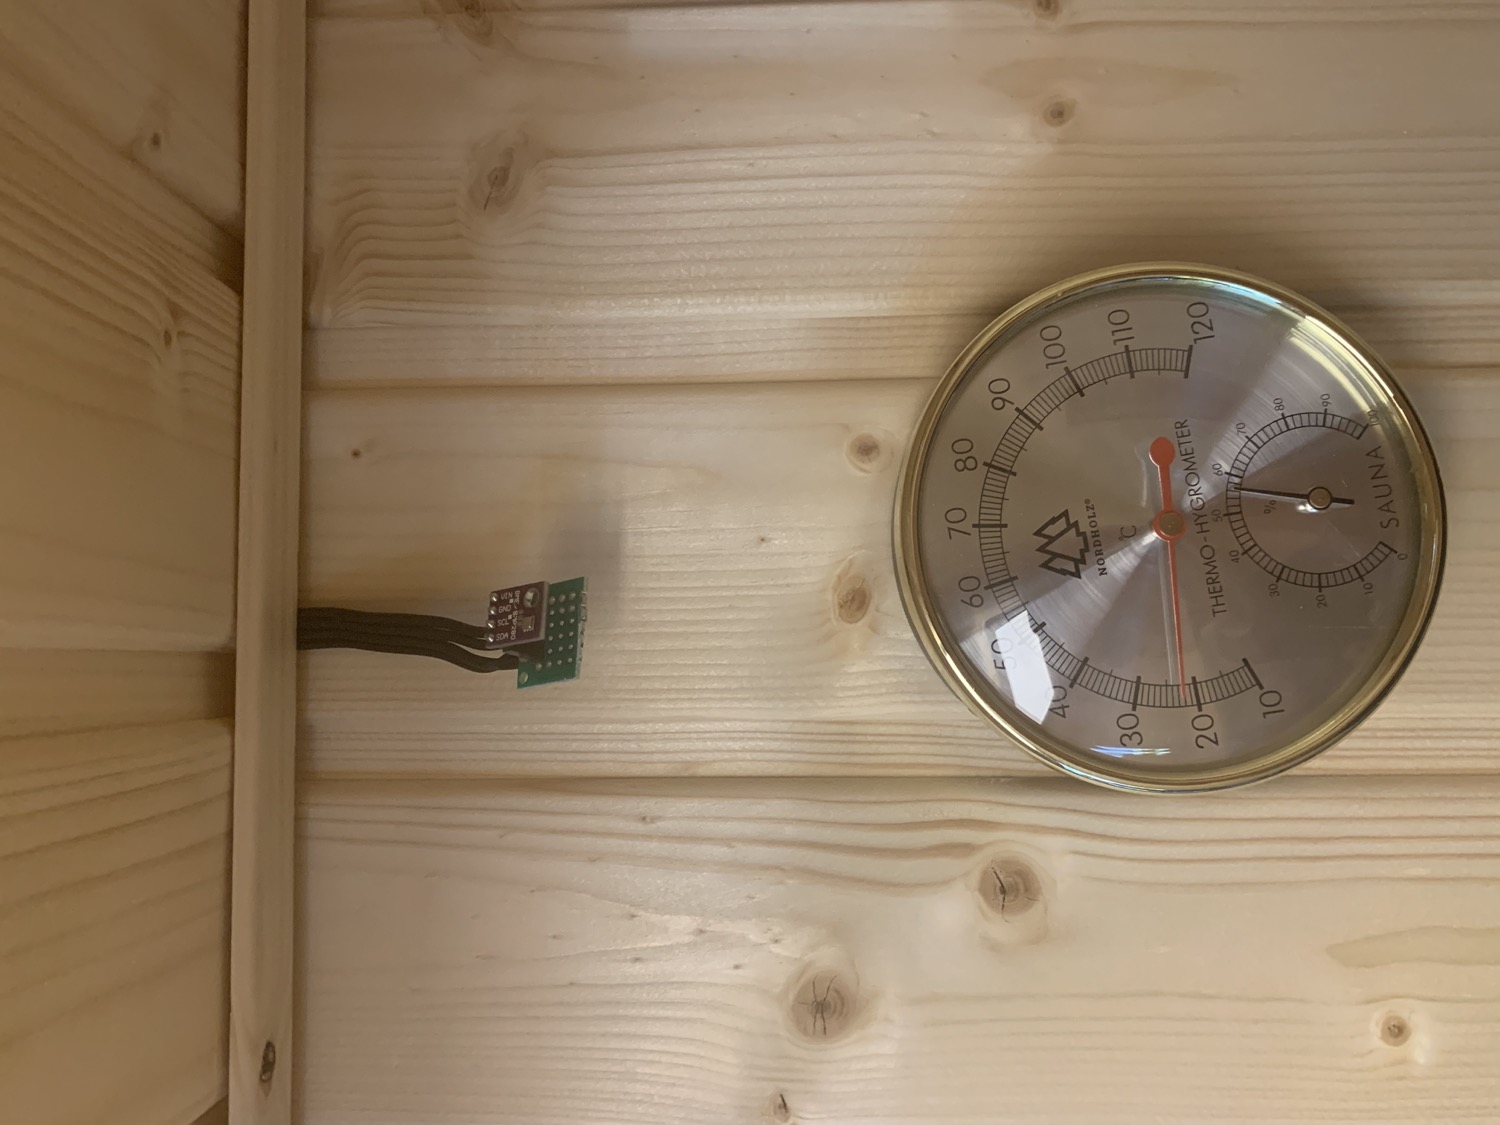 How the BME280 sensor was originally mounted in the sauna - unprotected. Note the analog temperature gauge below. That gauge was how I first found out that the BME280 temperature was so much off.